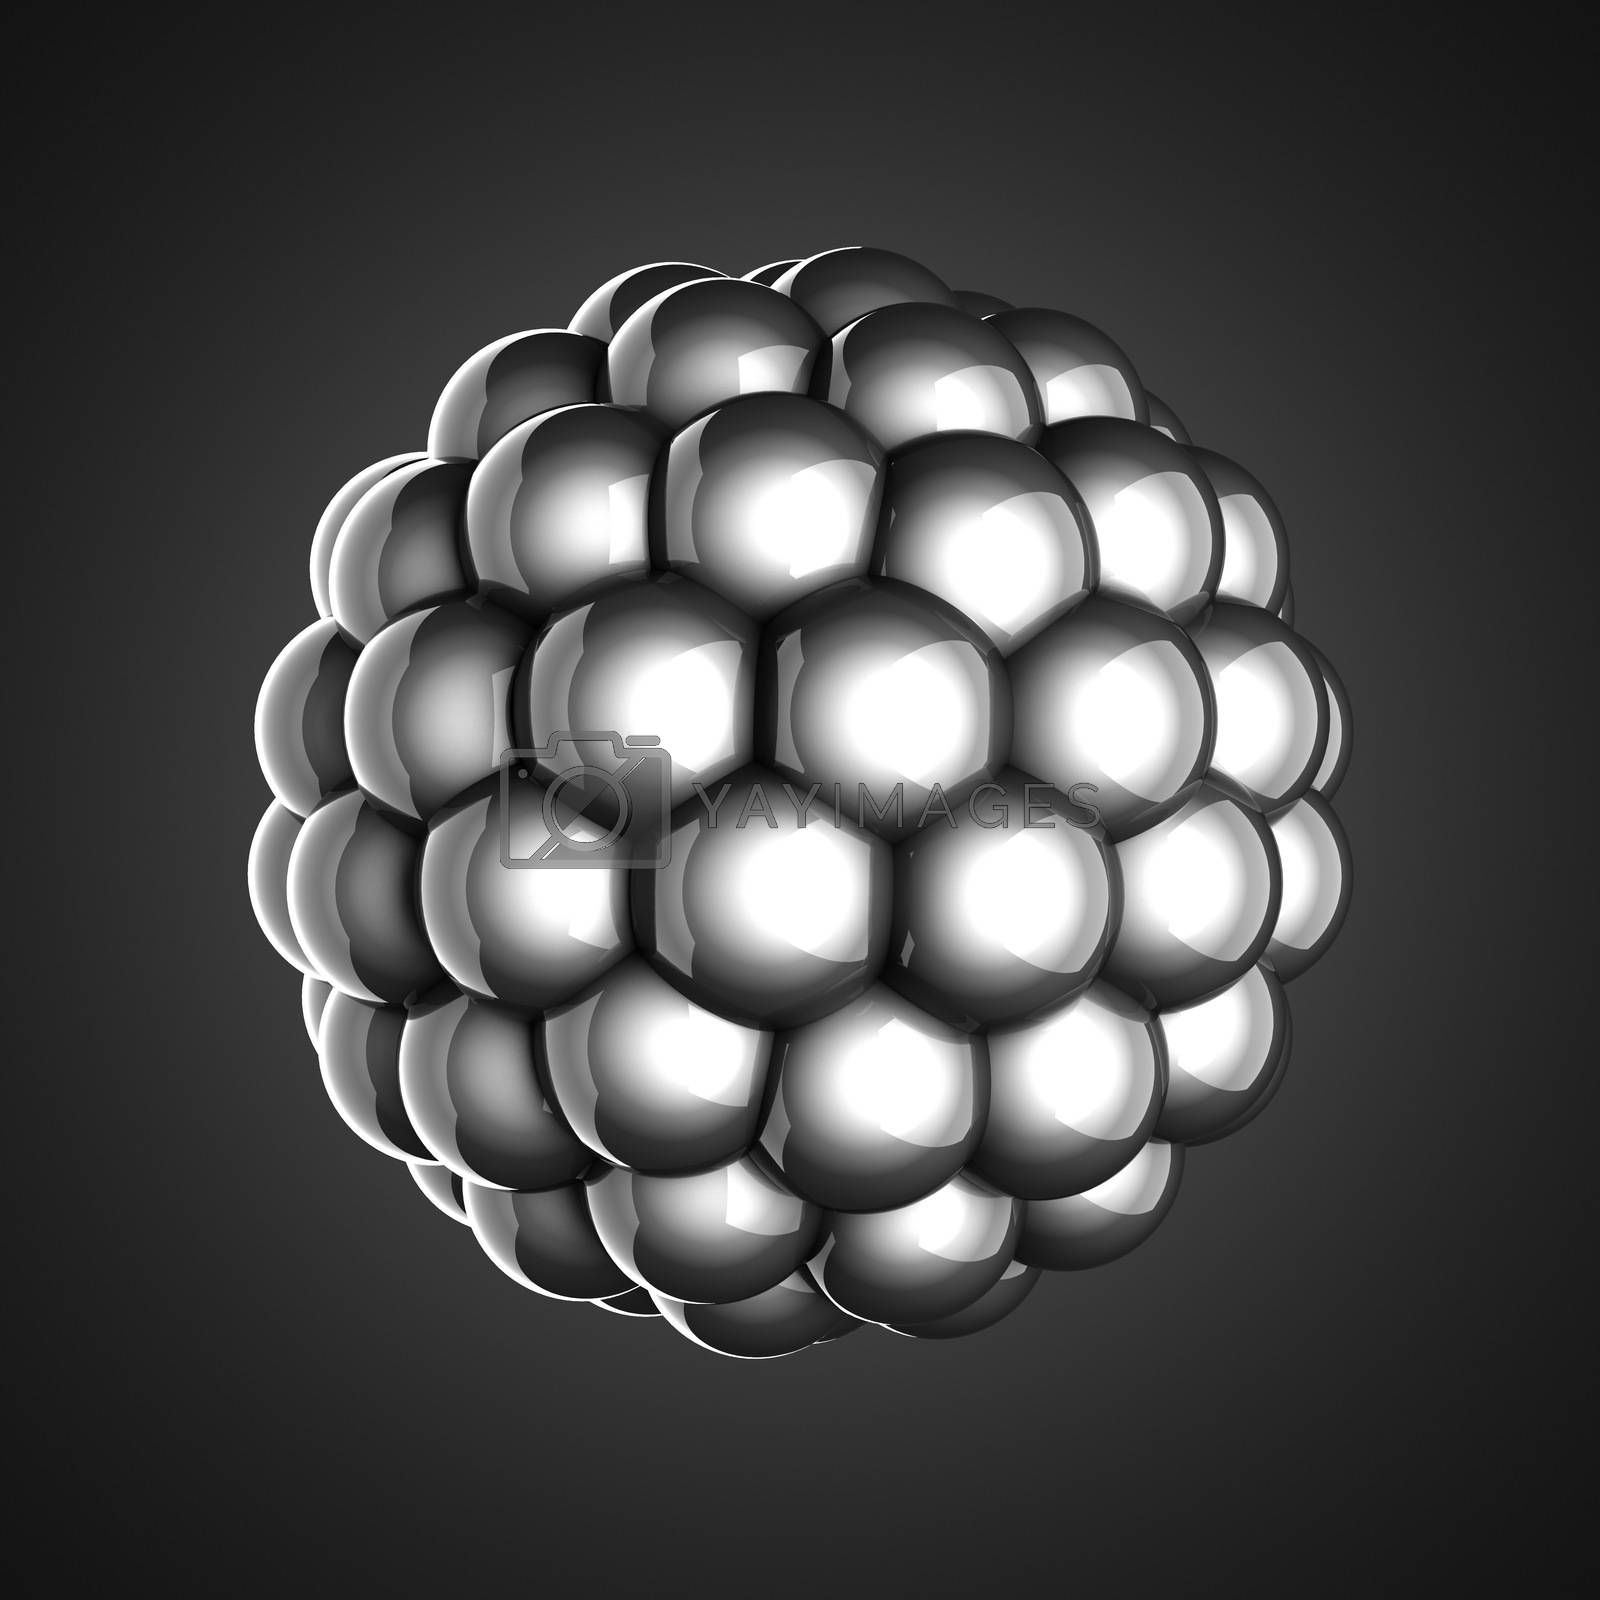 Royalty free image of A single atom scientific illustration by videodoctor